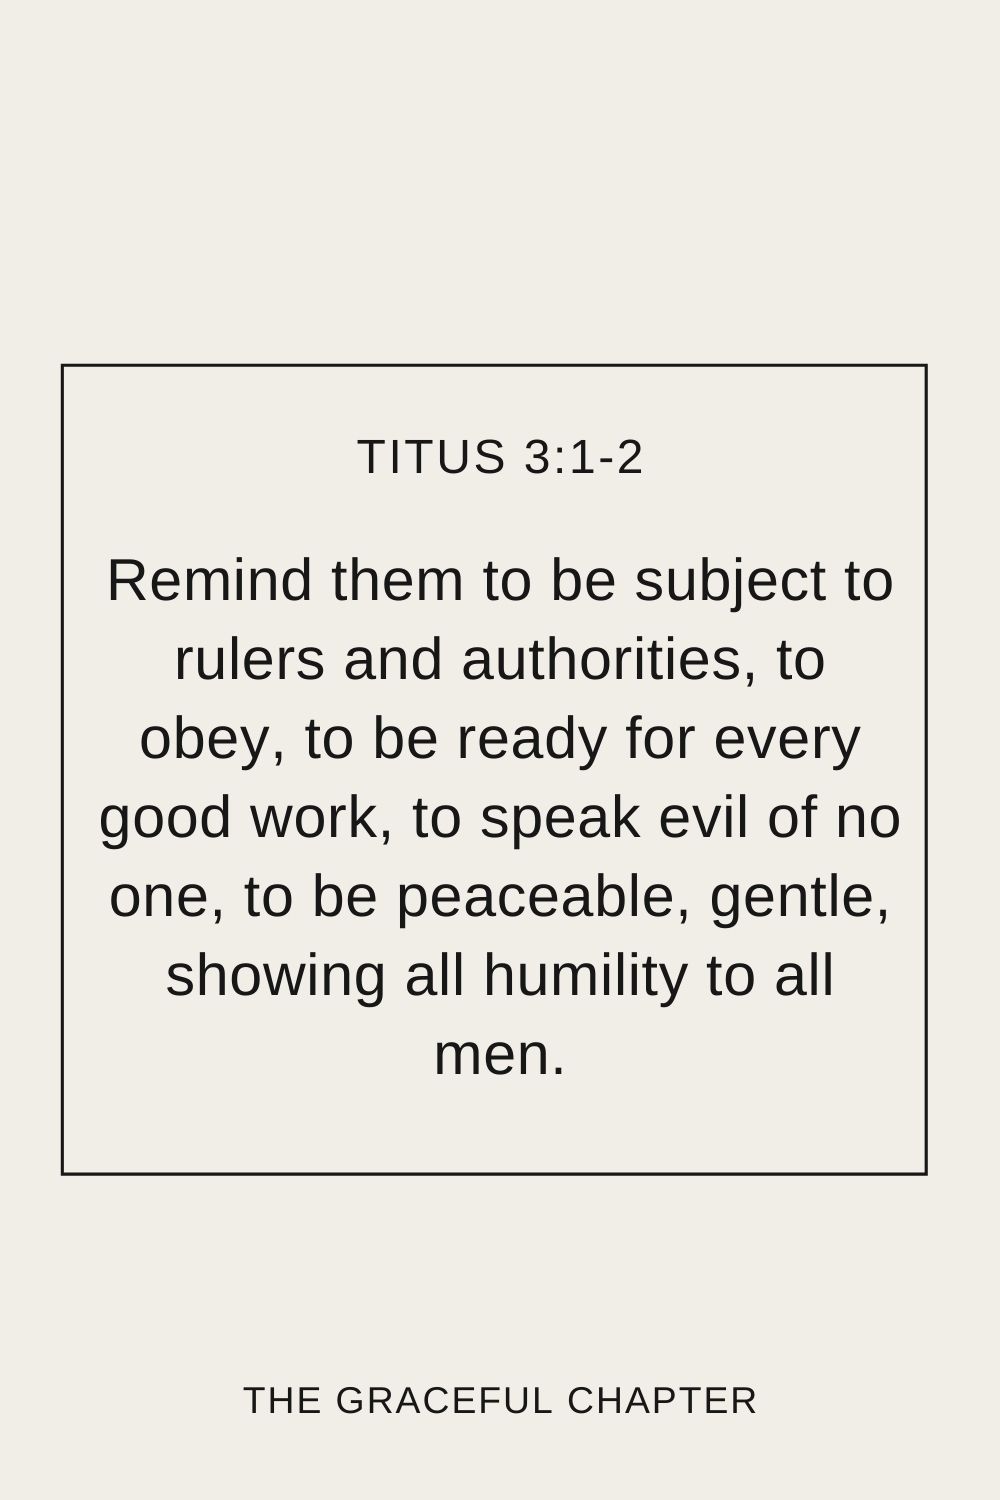 Remind them to be subject to rulers and authorities, to obey, to be ready for every good work, to speak evil of no one, to be peaceable, gentle, showing all humility to all men. Titus 3:1-2